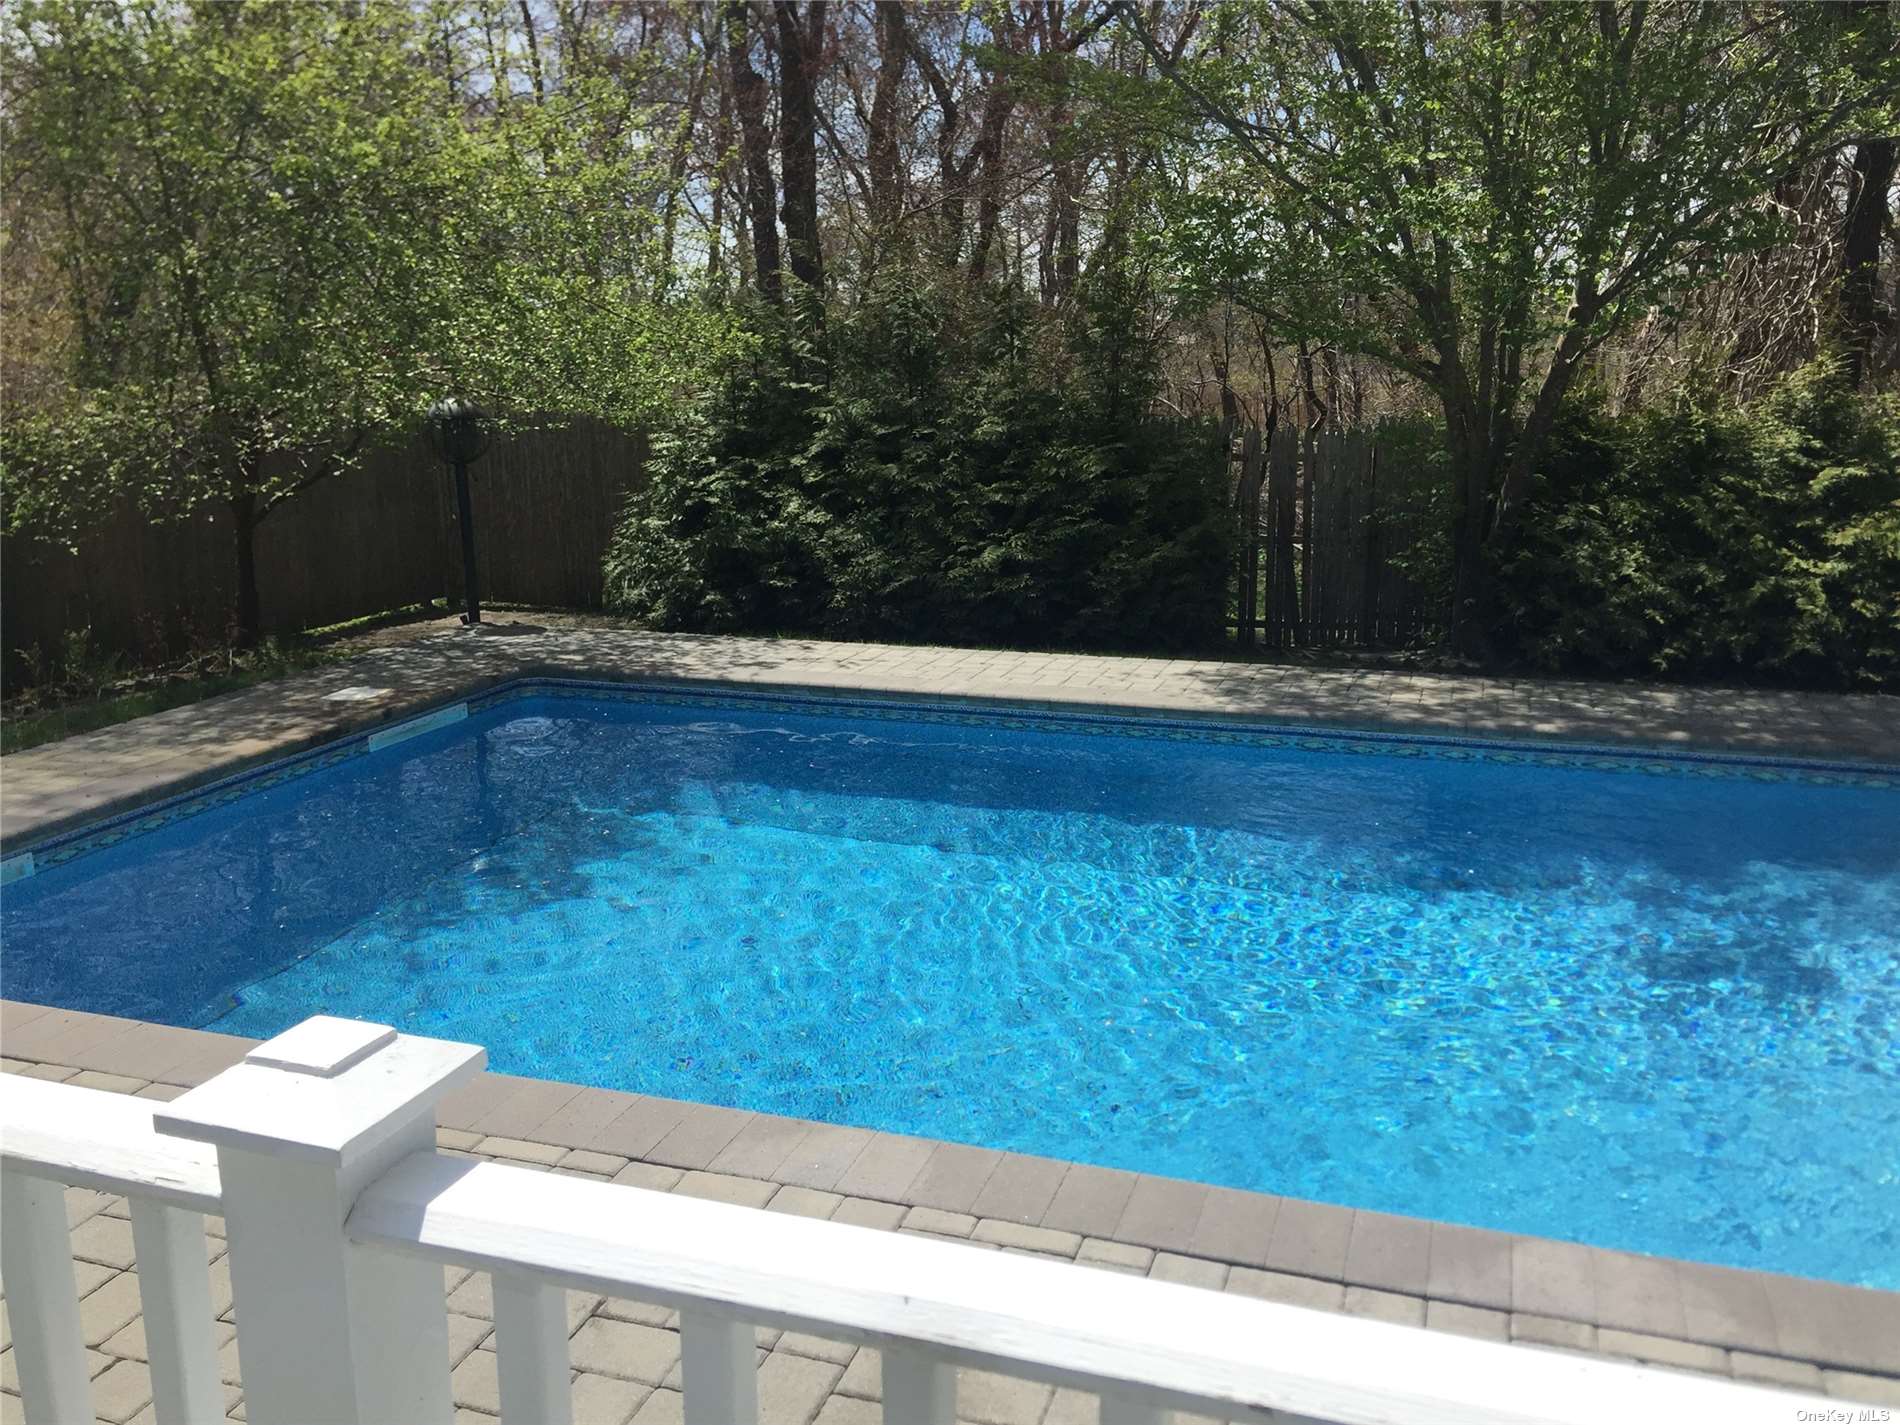 Sparkling pool abuts preserve to the west